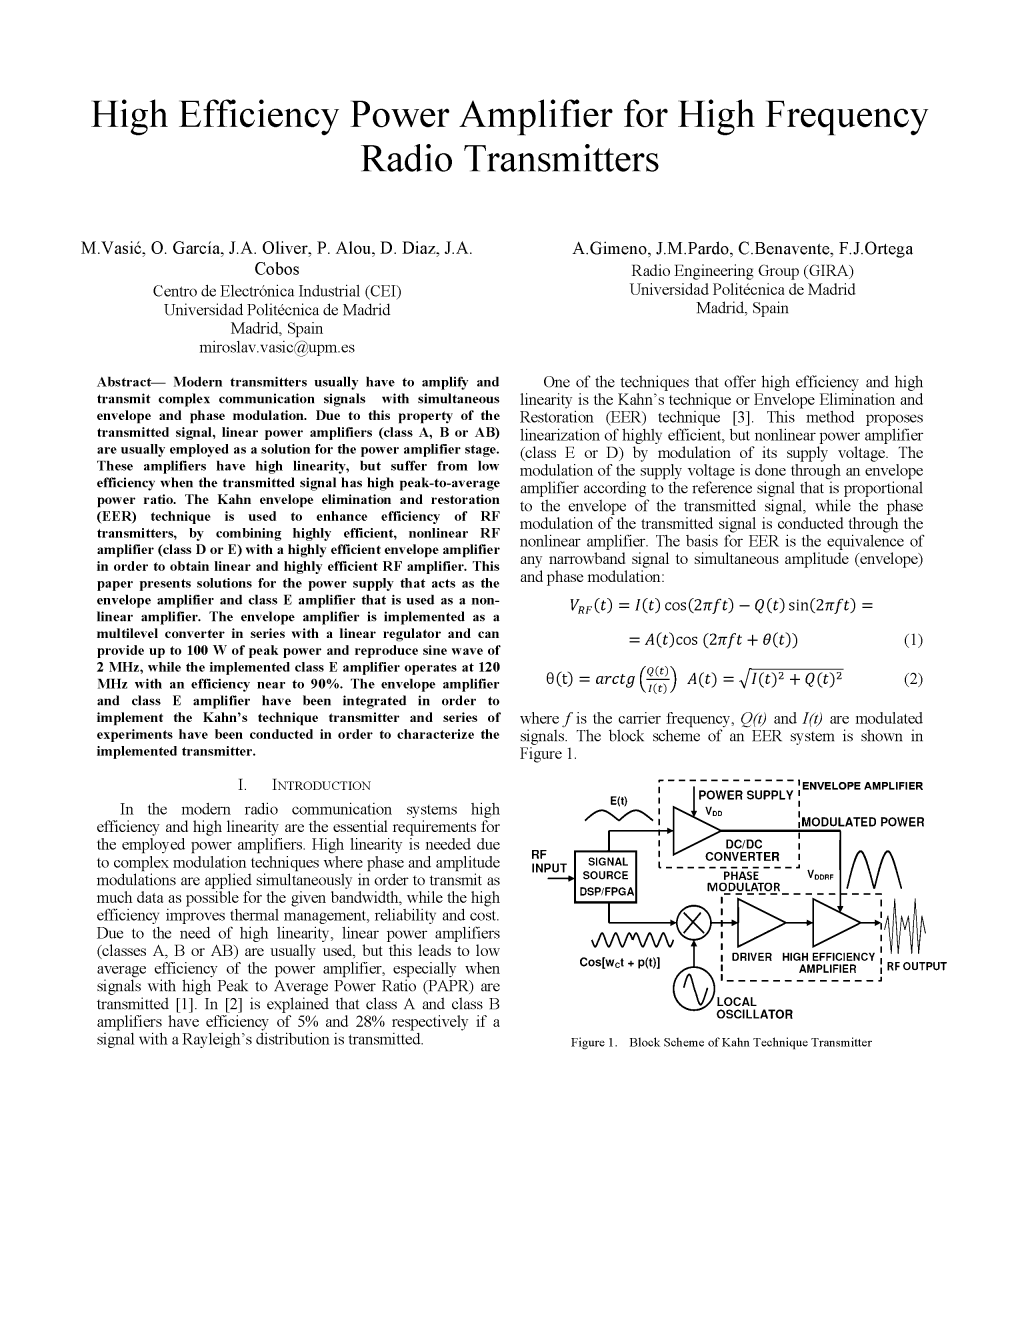 High Efficiency Power Amplifier for High Frequency Radio Transmitters